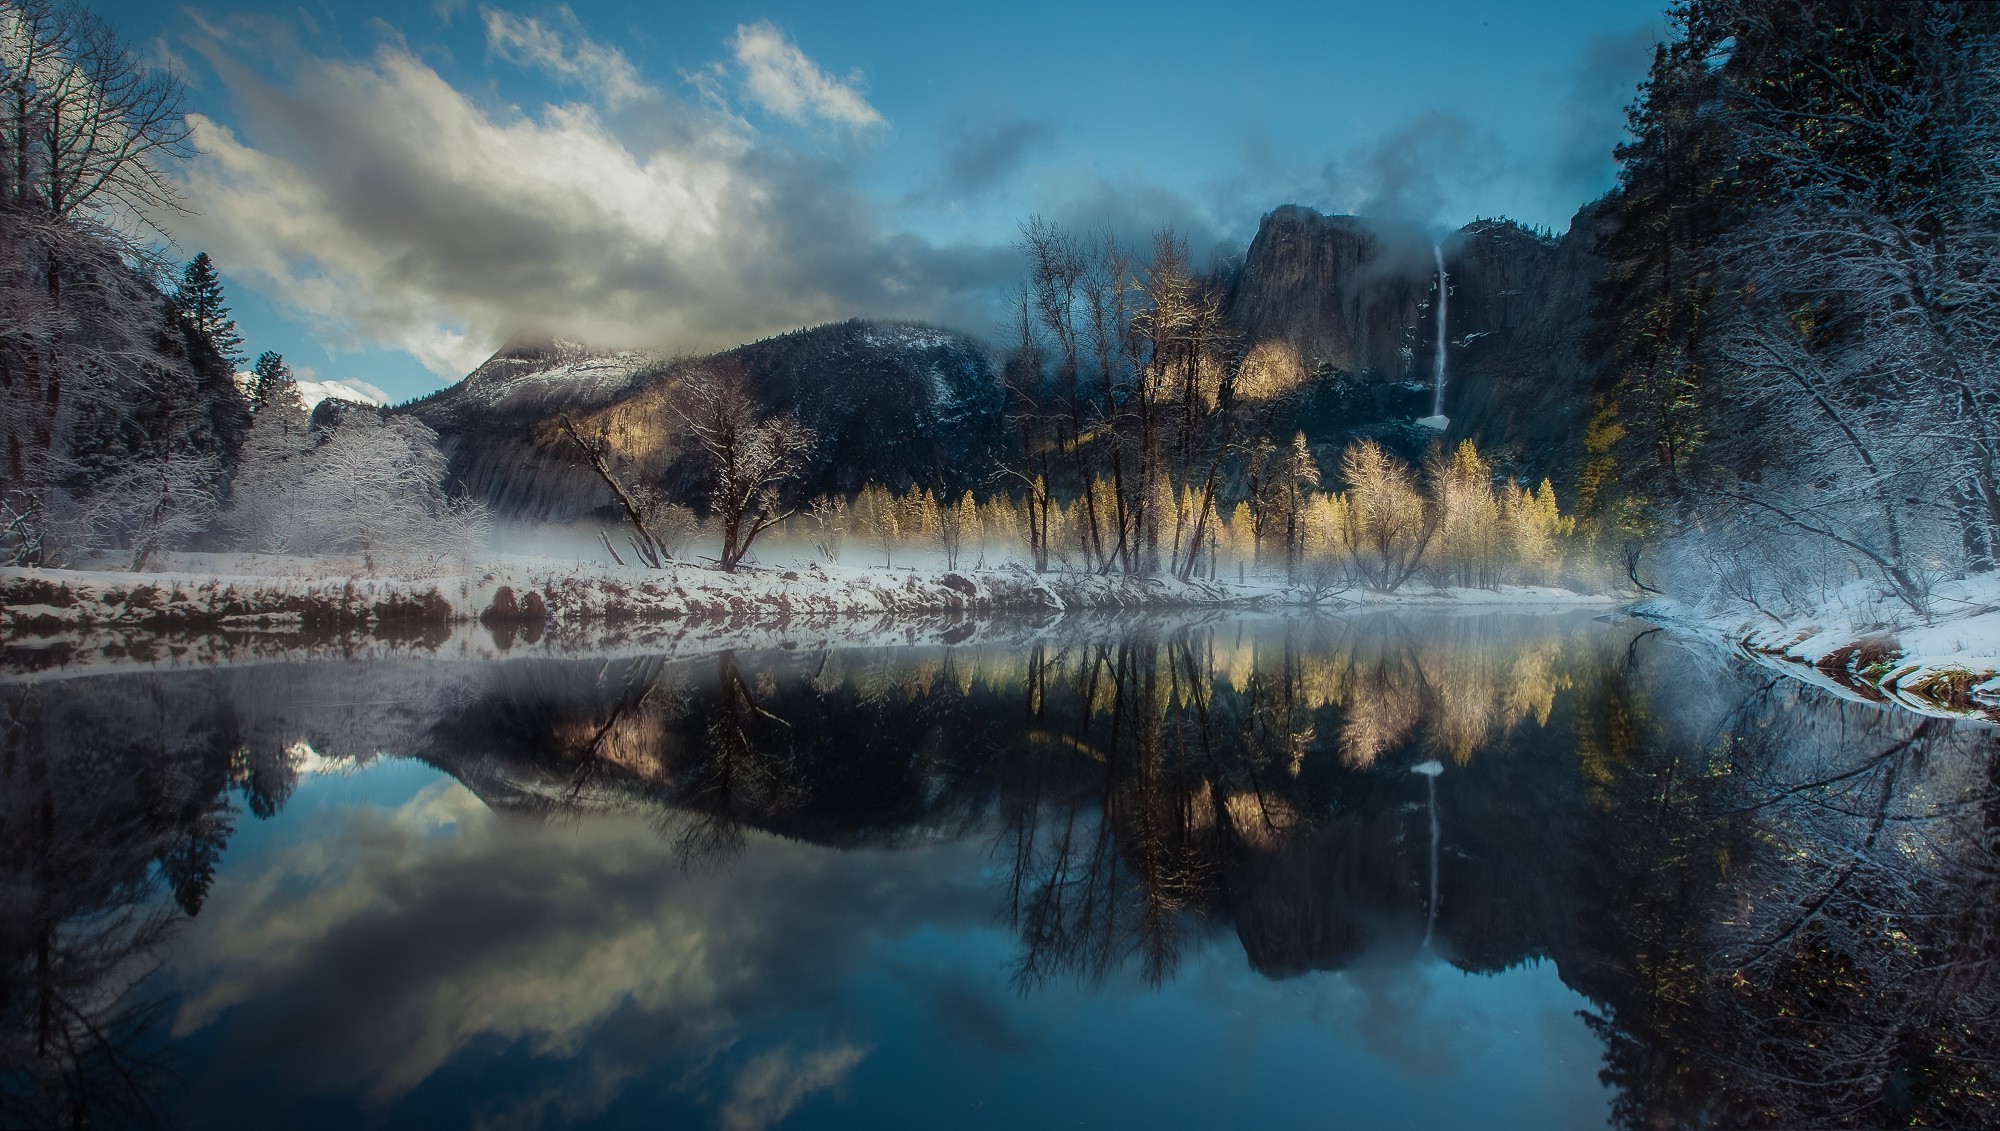 landscape, Nature, Winter, River, Reflection, Waterfall, Mountain, Forest, Yosemite National Park, Snow, Trees, Cold, El Capitan Wallpaper